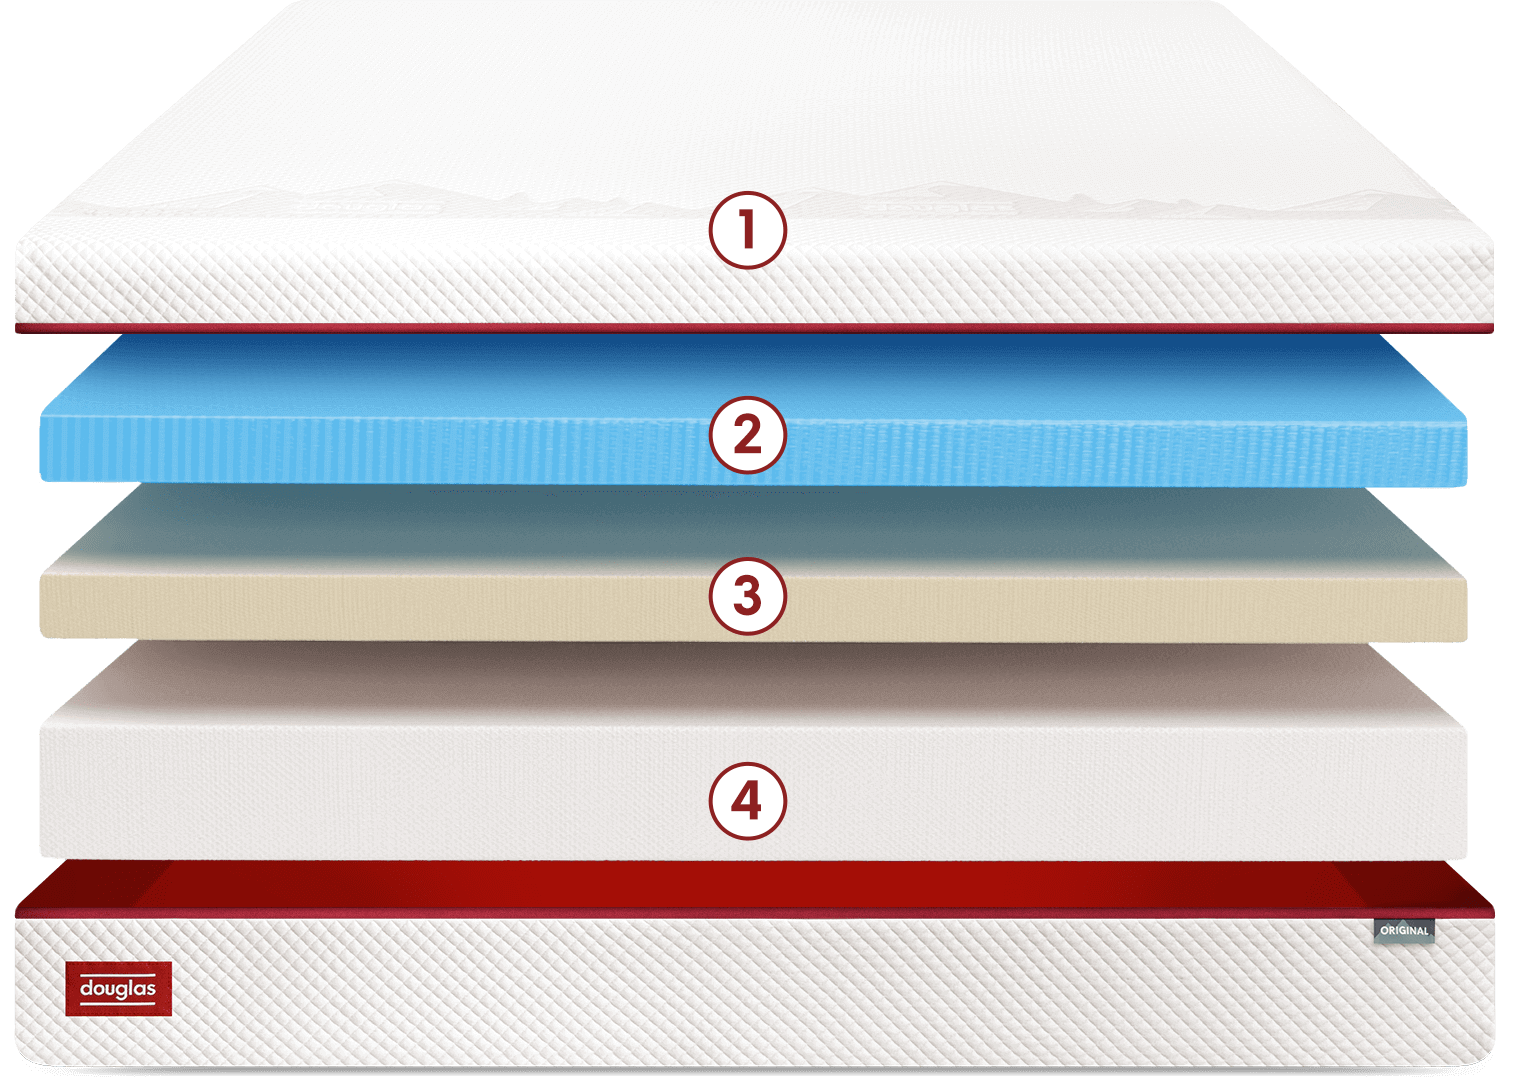 Expanded view Douglas Original mattress layers: top cover, cooling gel foam, transition foam, and support foam